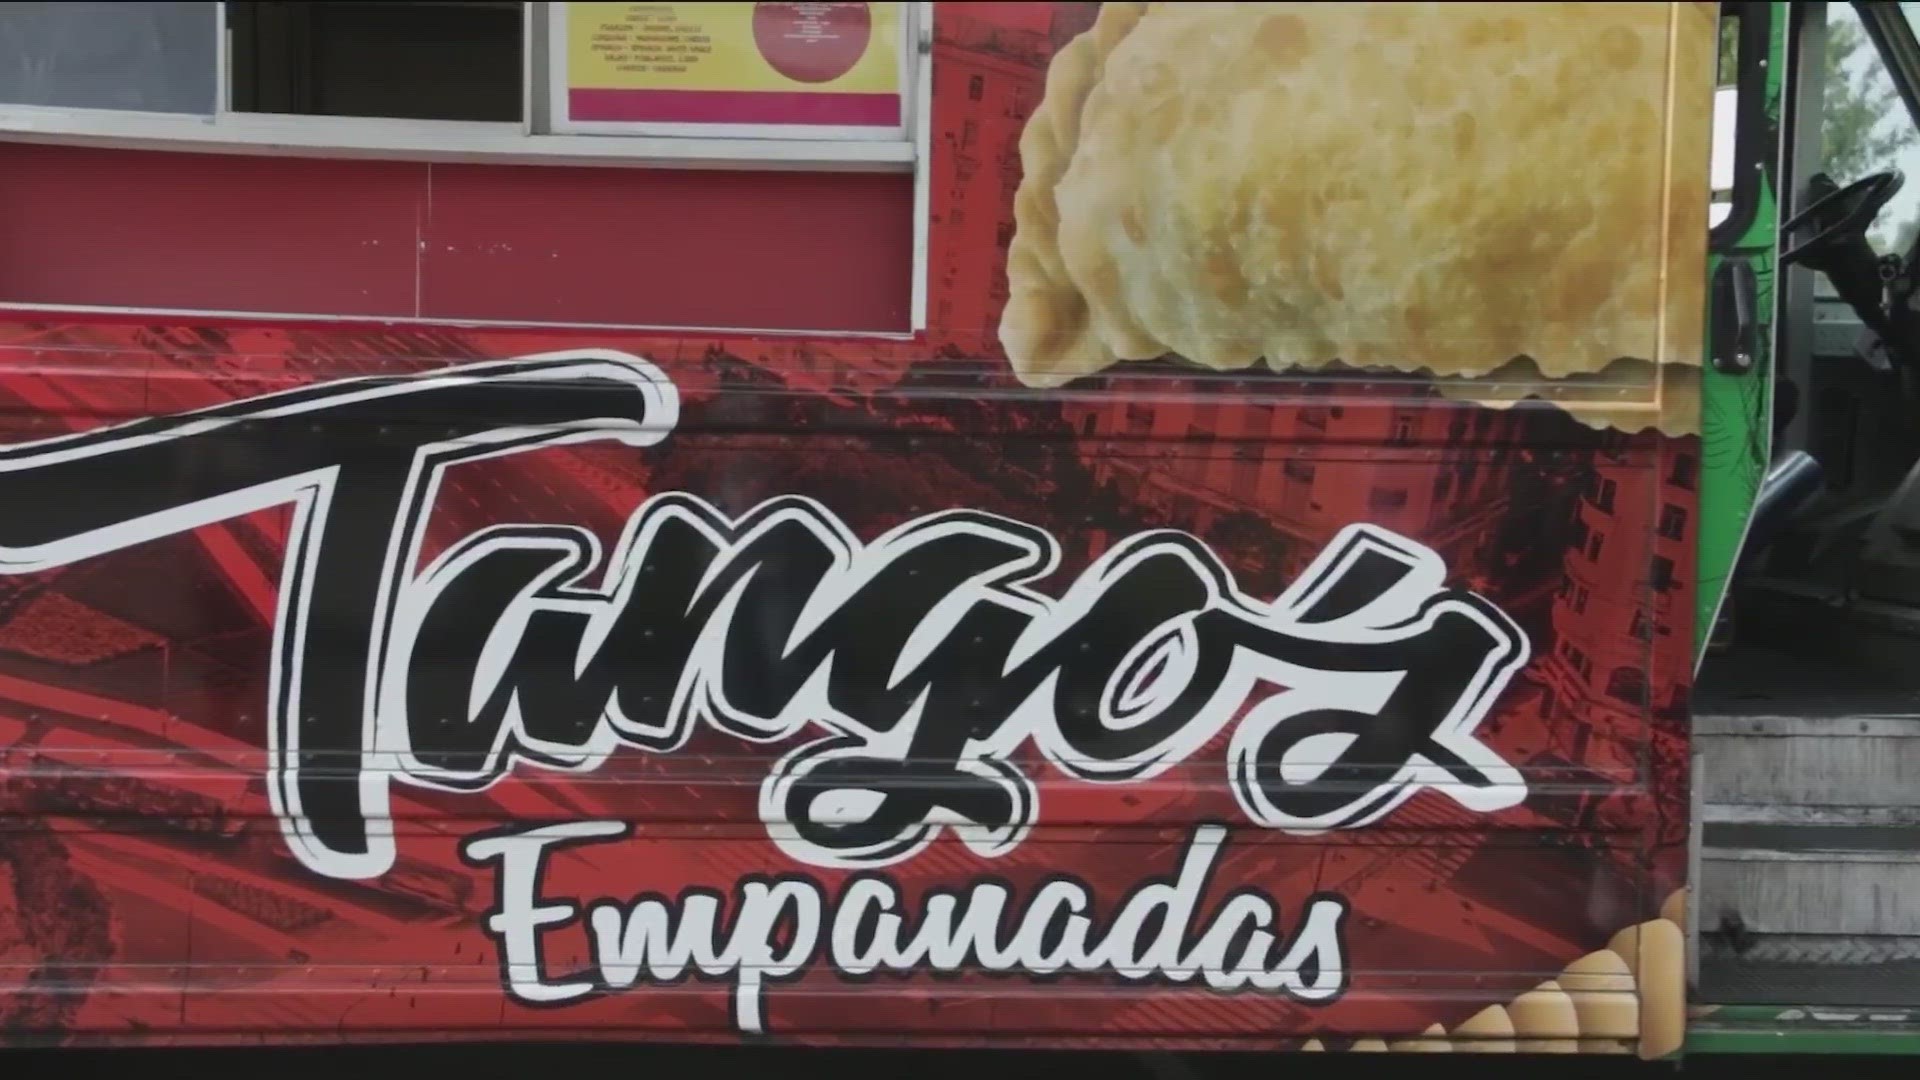 Boise's own Saint Lawrence Gridiron and Tango’s Empanadas will both be featured on Food Network’s “Diners, Drive-Ins and Dives" Friday night.